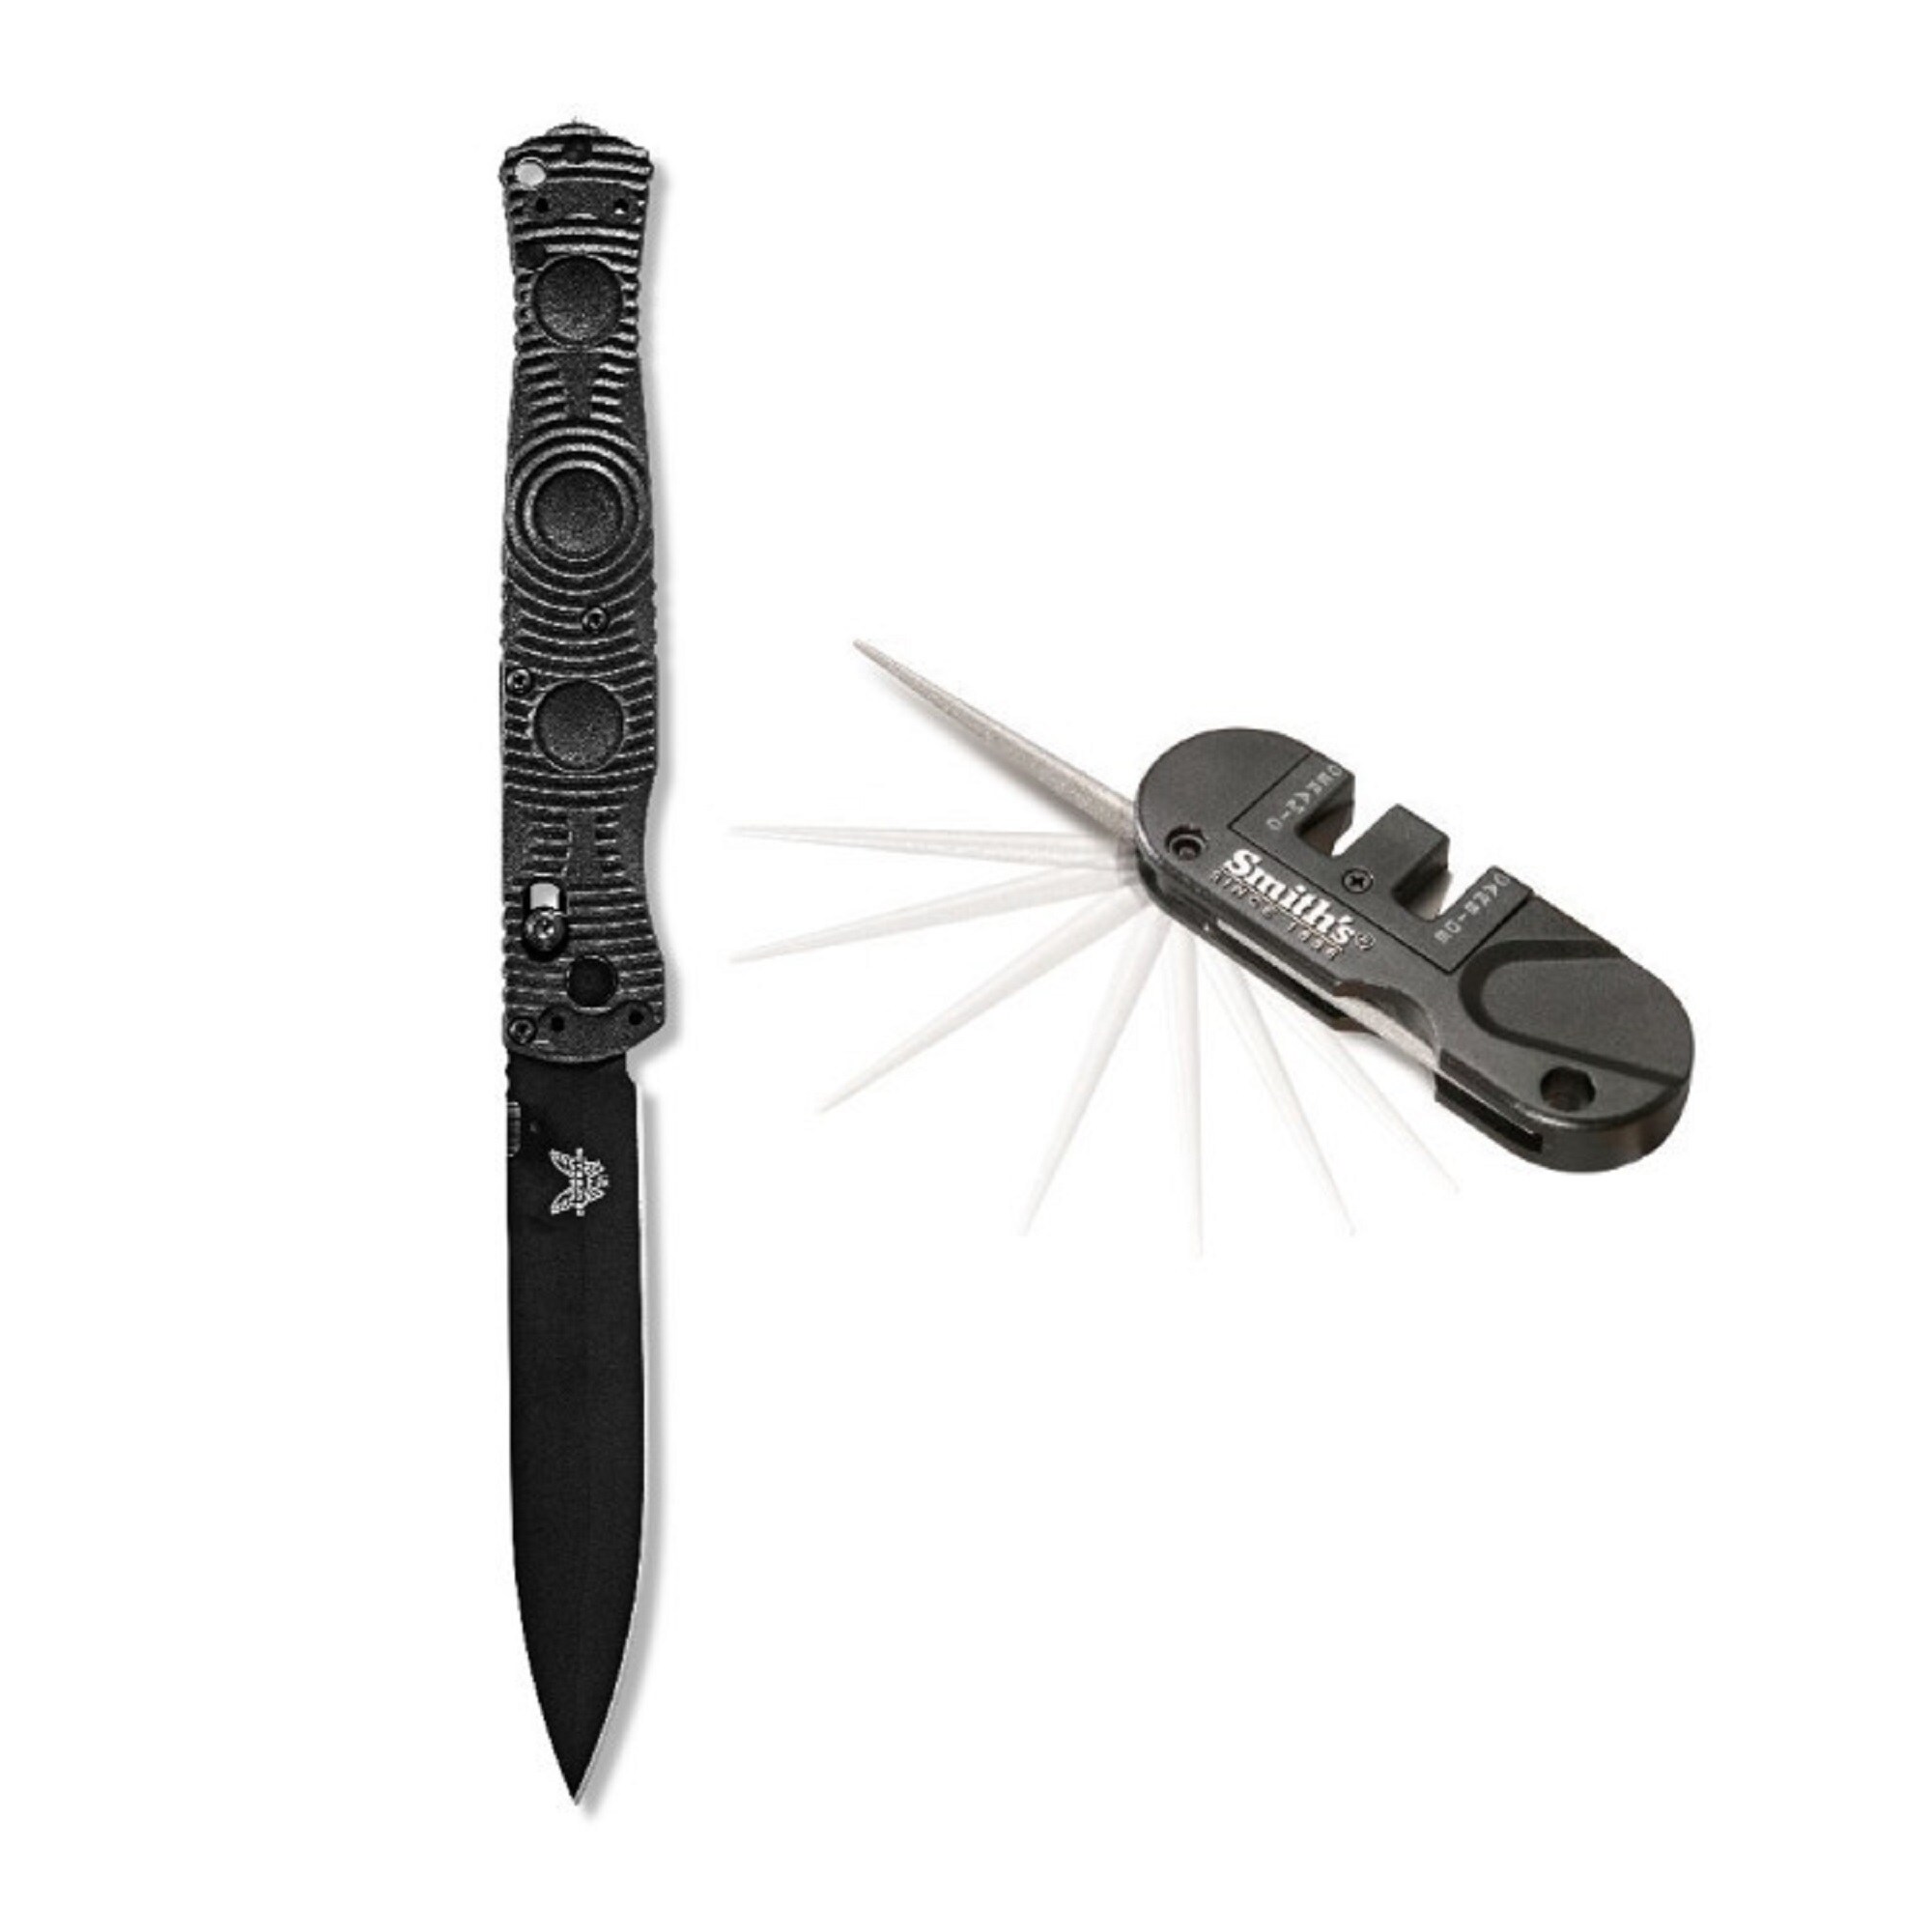 Benchmade 391T SOCP Tactical Folder Knife Blade with Manual Knife